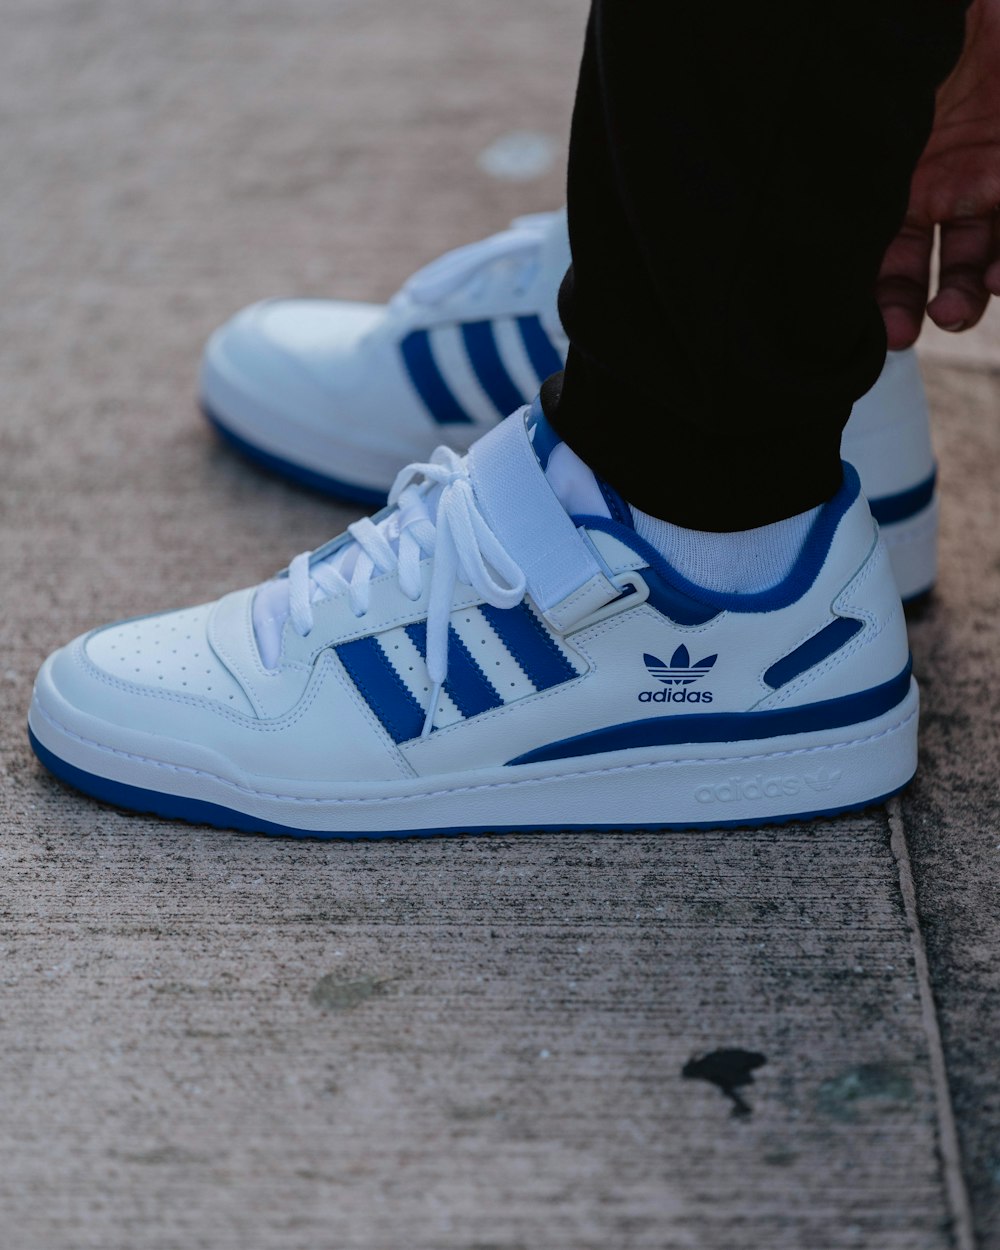 a close up of a person's white and blue adidas sneakers